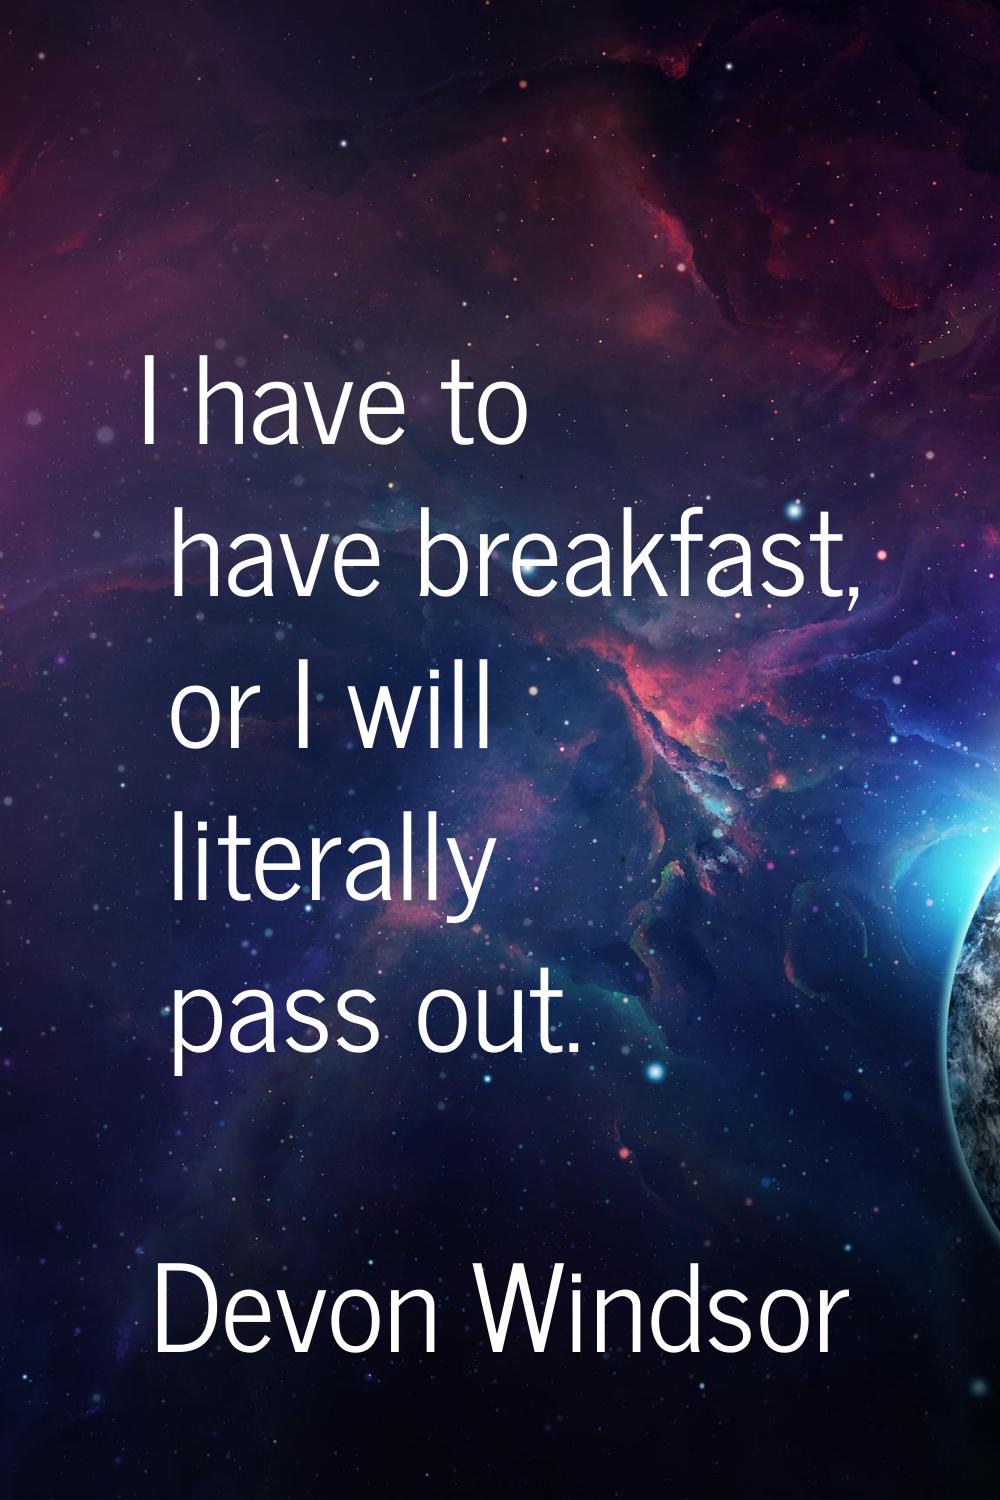 I have to have breakfast, or I will literally pass out.